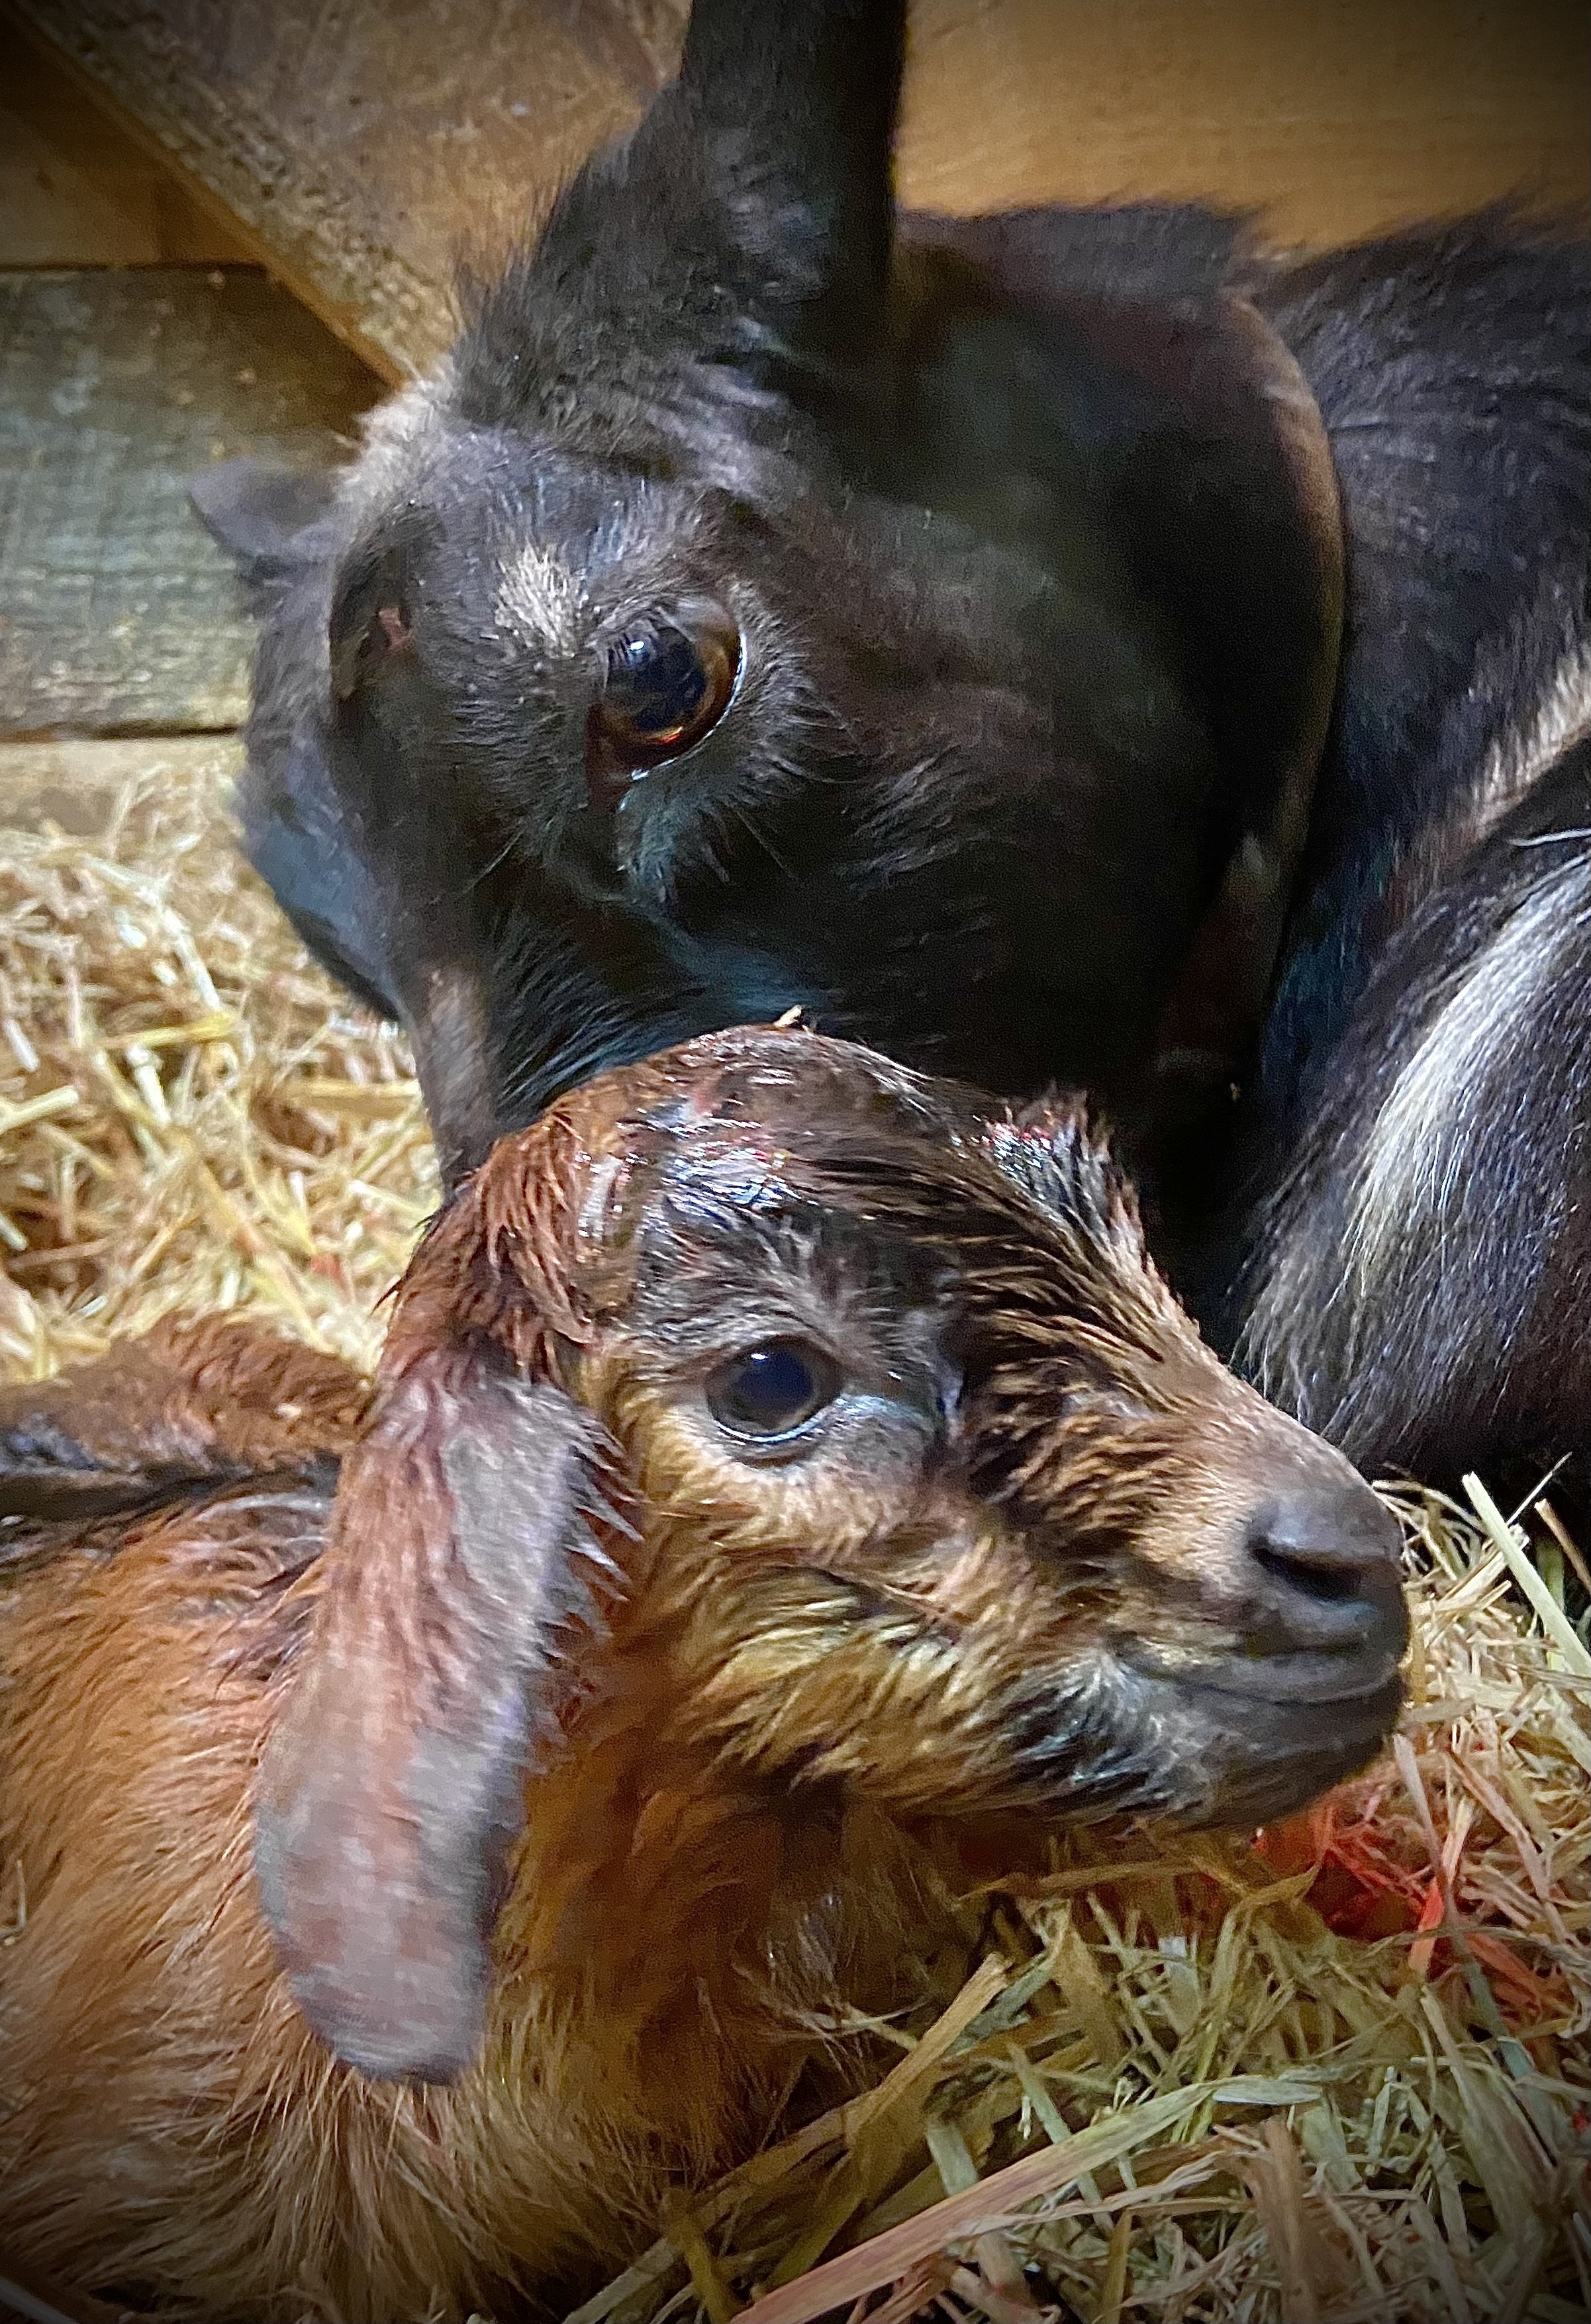 Only a few minutes old!